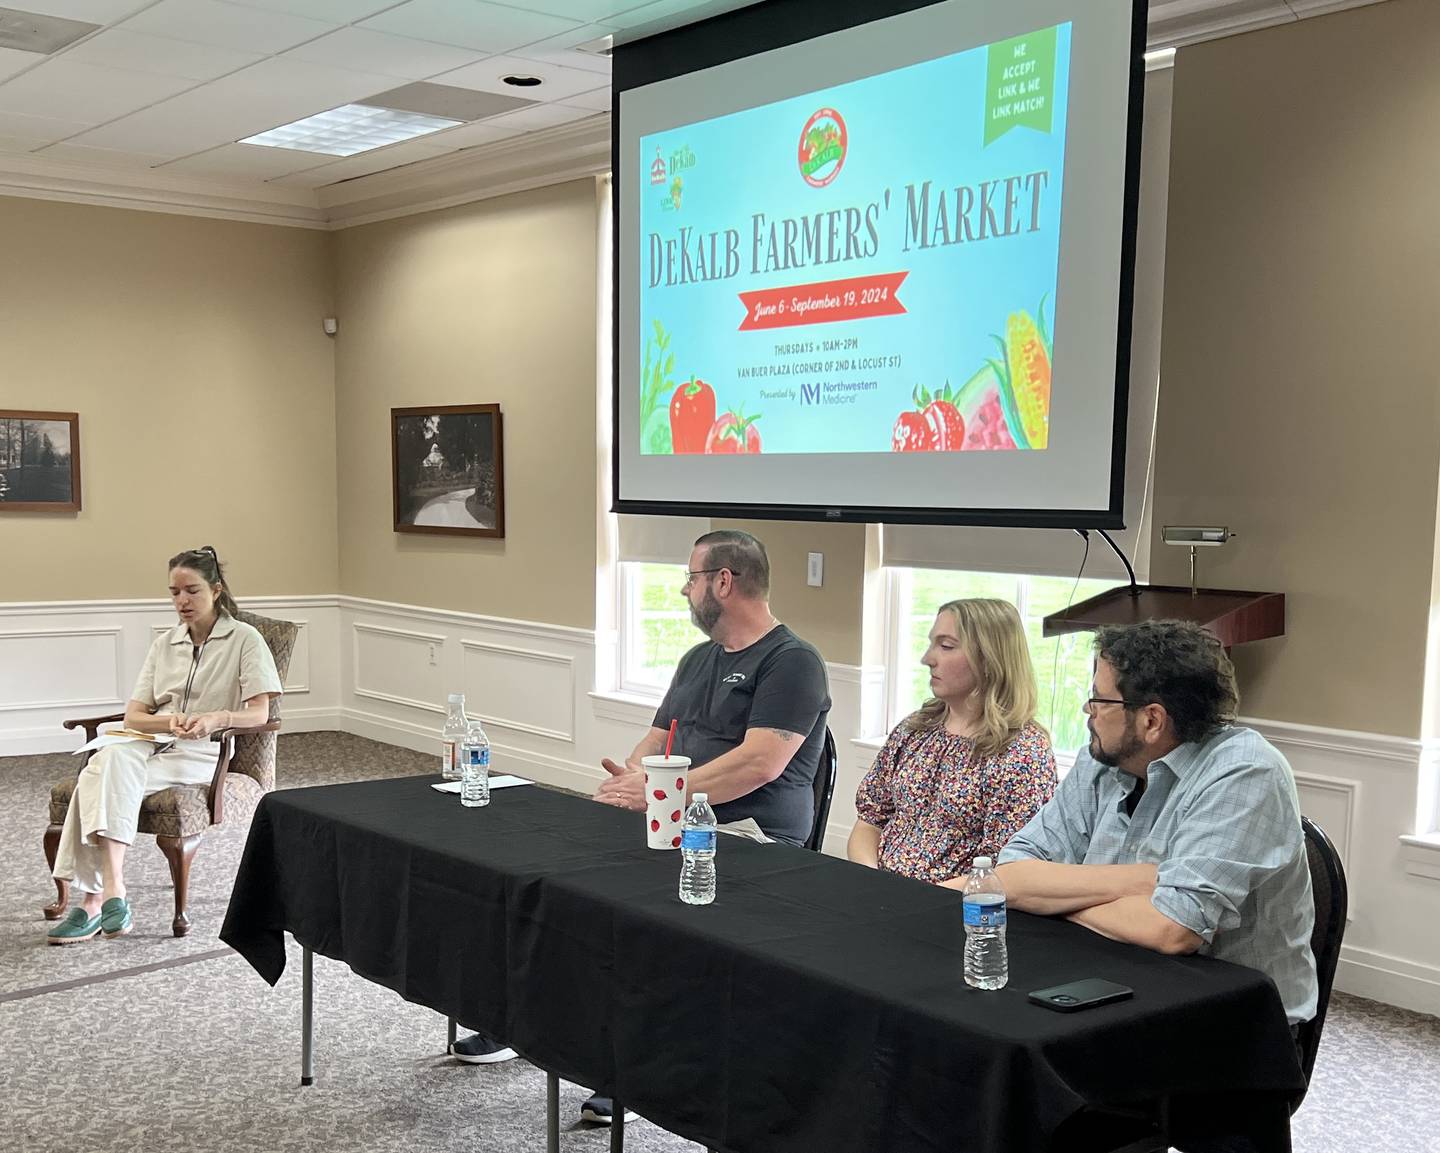 Ellwood House Curator of Education and Interpretation Aubrey King moderated a panel discussion between DeKalb County Farmer's Market stakeholders Dan Dietz, Virginia Filicetti and Gavin Wilson on May 2, 2024, inside the Ellwood House Museum.